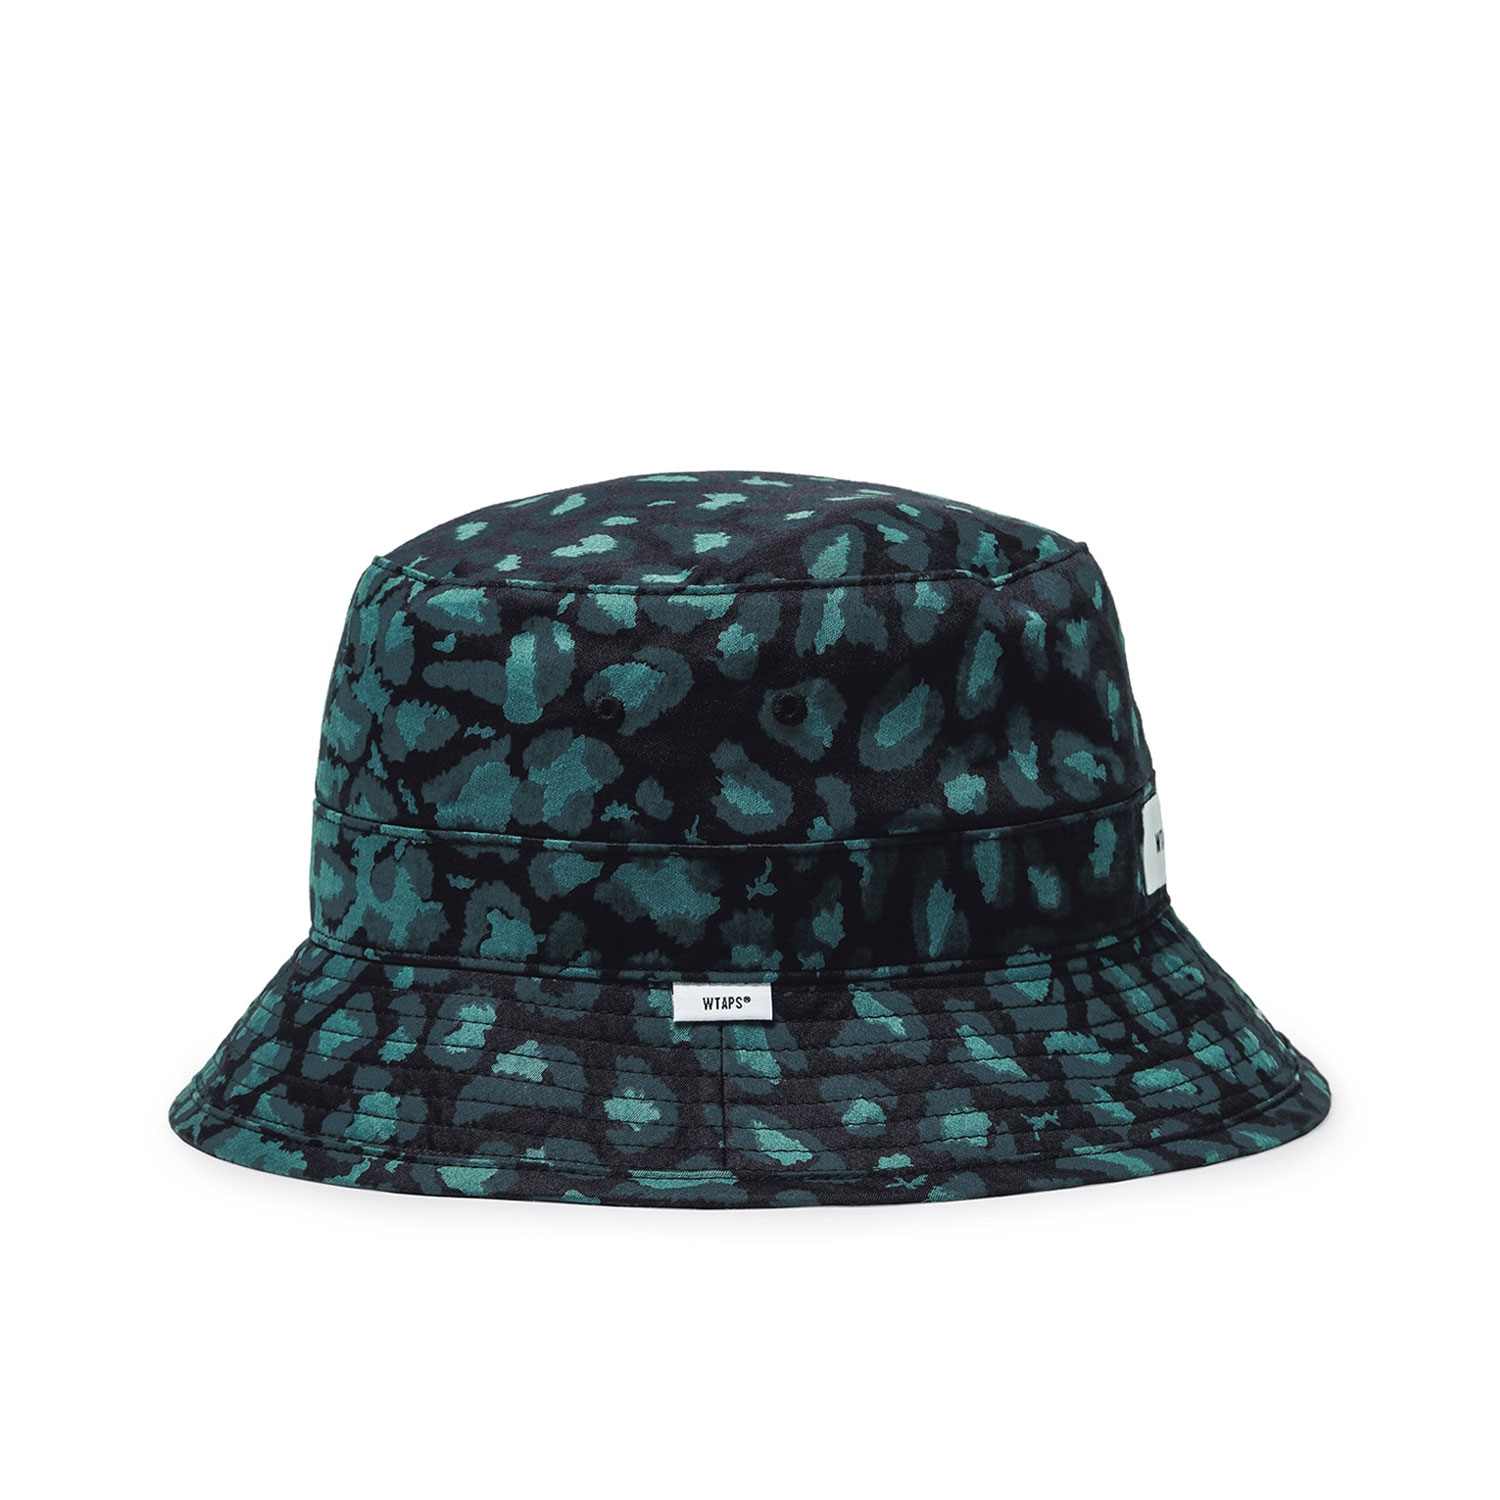 23fwWTAPS BUCKET 03 HAT SYNTHETIC 23AW XL 正規 - ハット